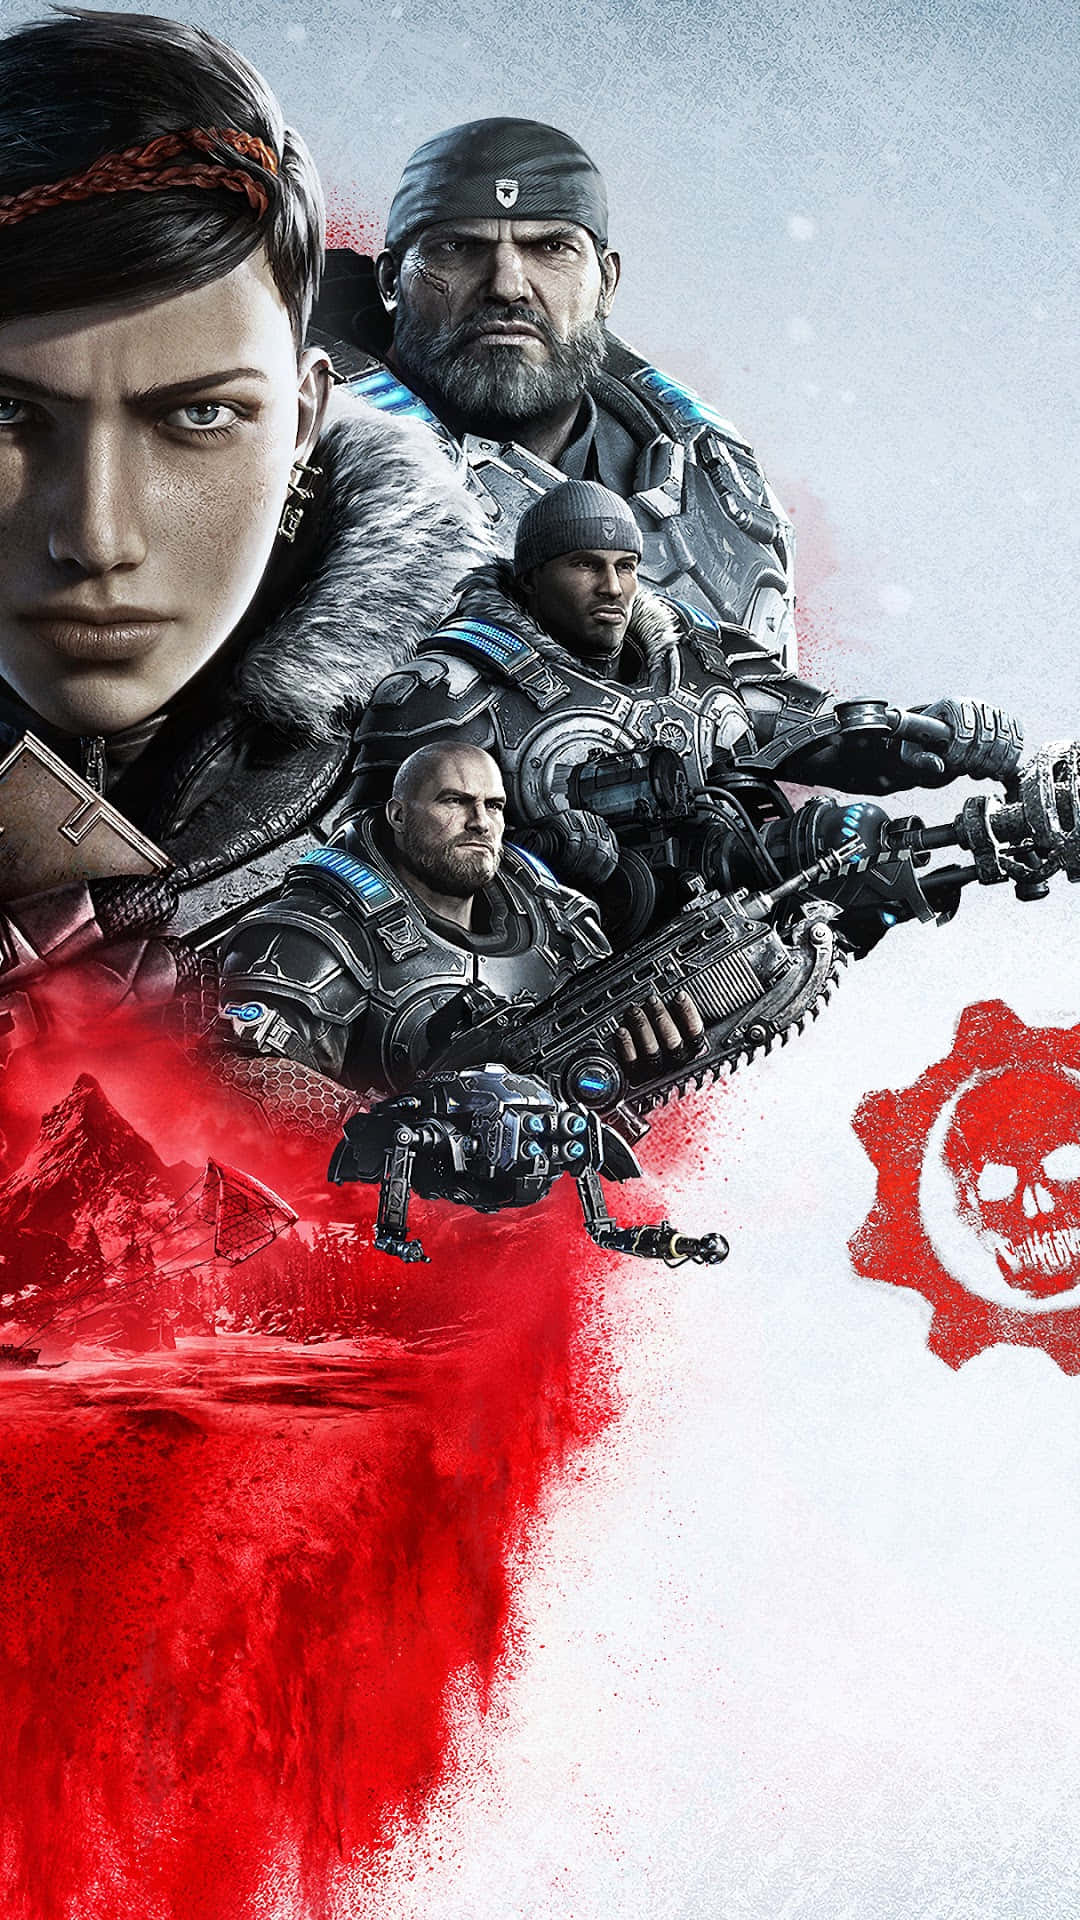 Uncover the mysteries of Gears of War 5 with Android